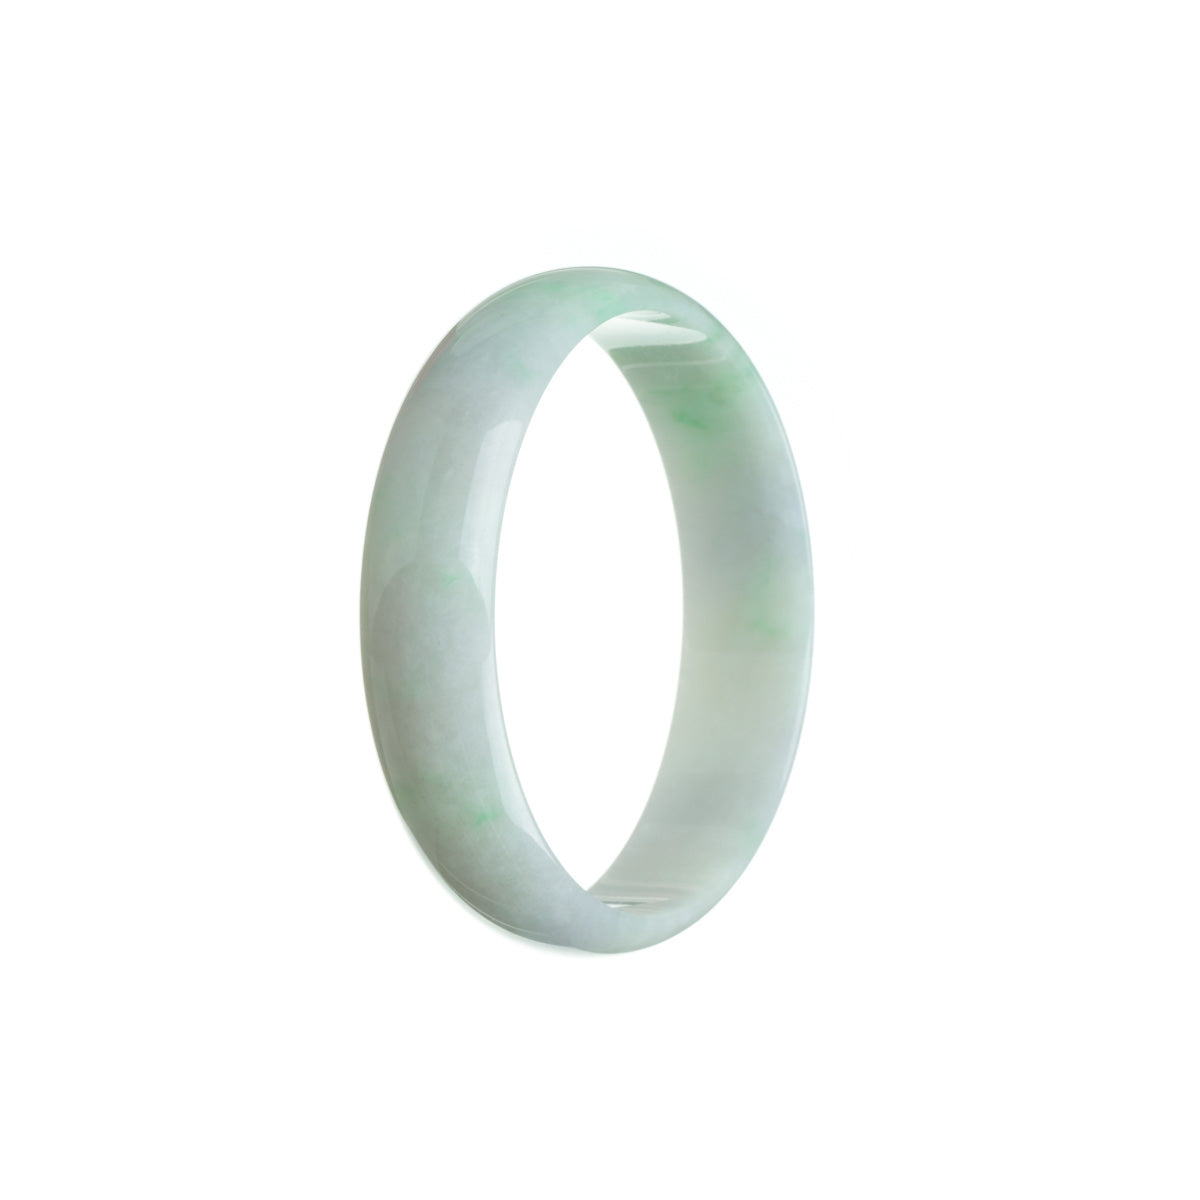 A close-up image of a beautiful green lavender and white Burmese jade bracelet. The bracelet has a flat shape and measures 52mm in width. It is certified as Grade A, indicating its high-quality and authenticity. The bracelet is sold by MAYS.